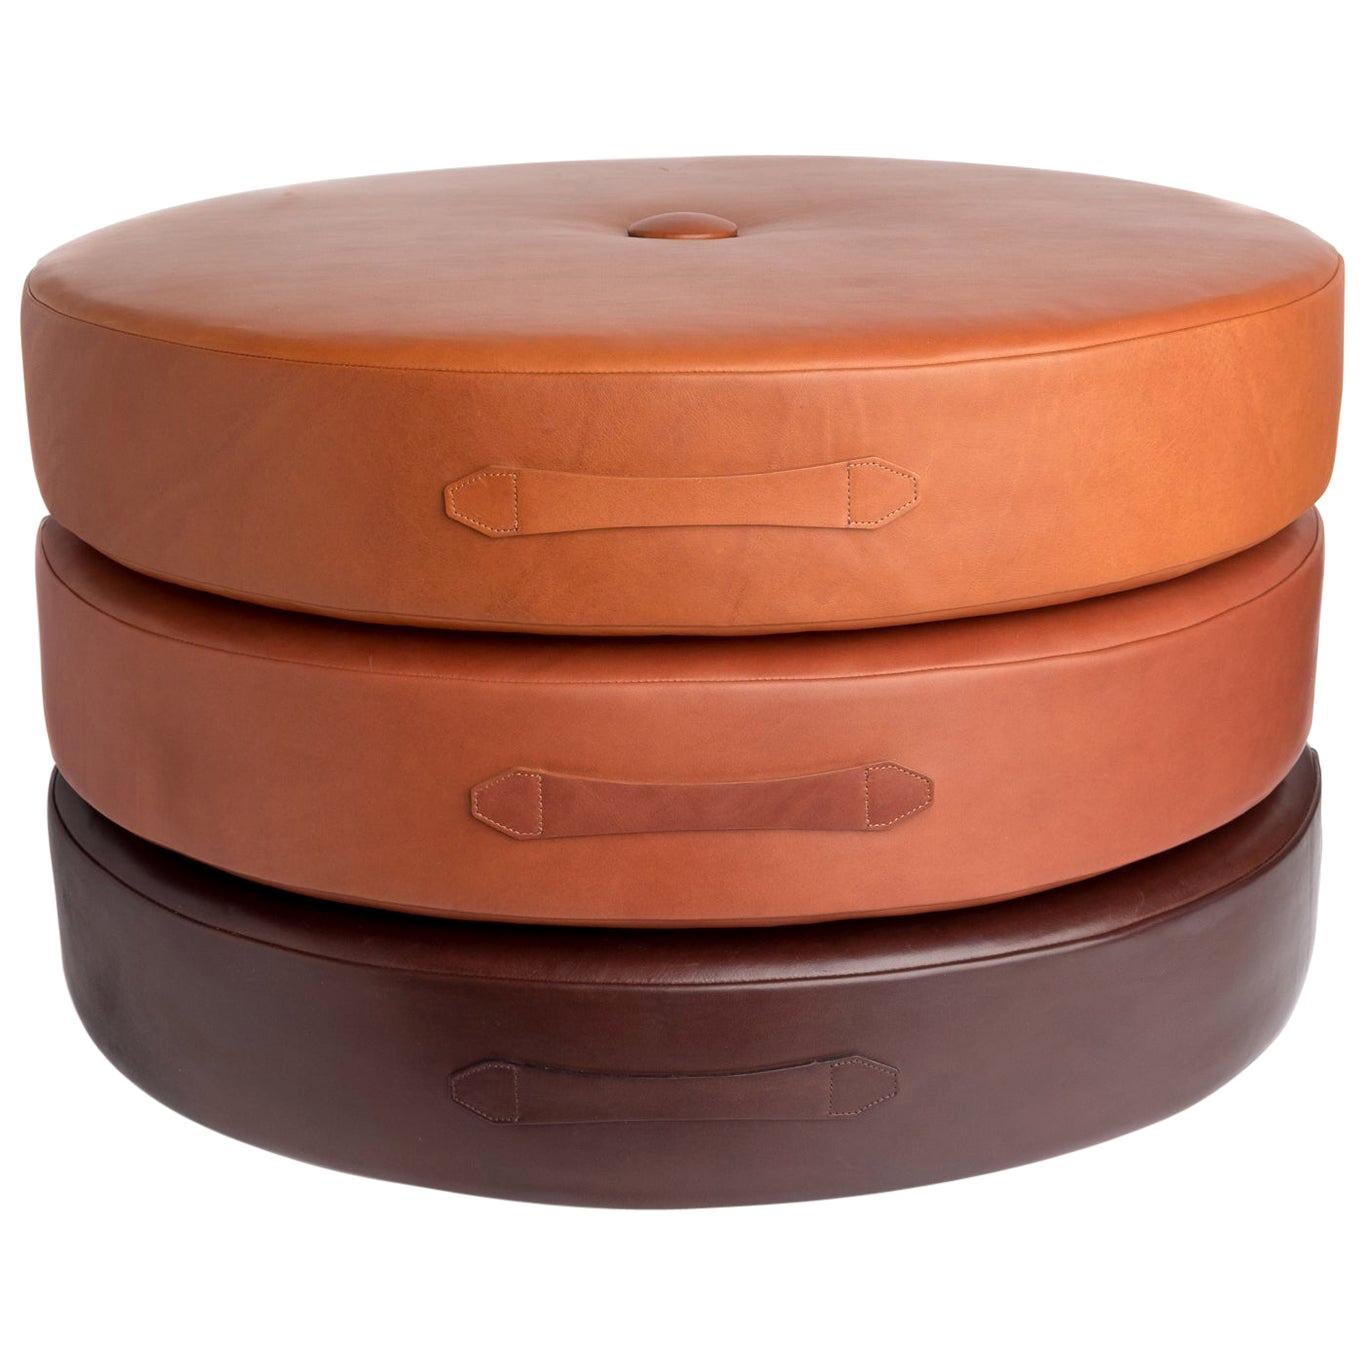 30"Ø Leather Drum Stacking Floor Cushion (Set of 3) by Moses Nadel For Sale